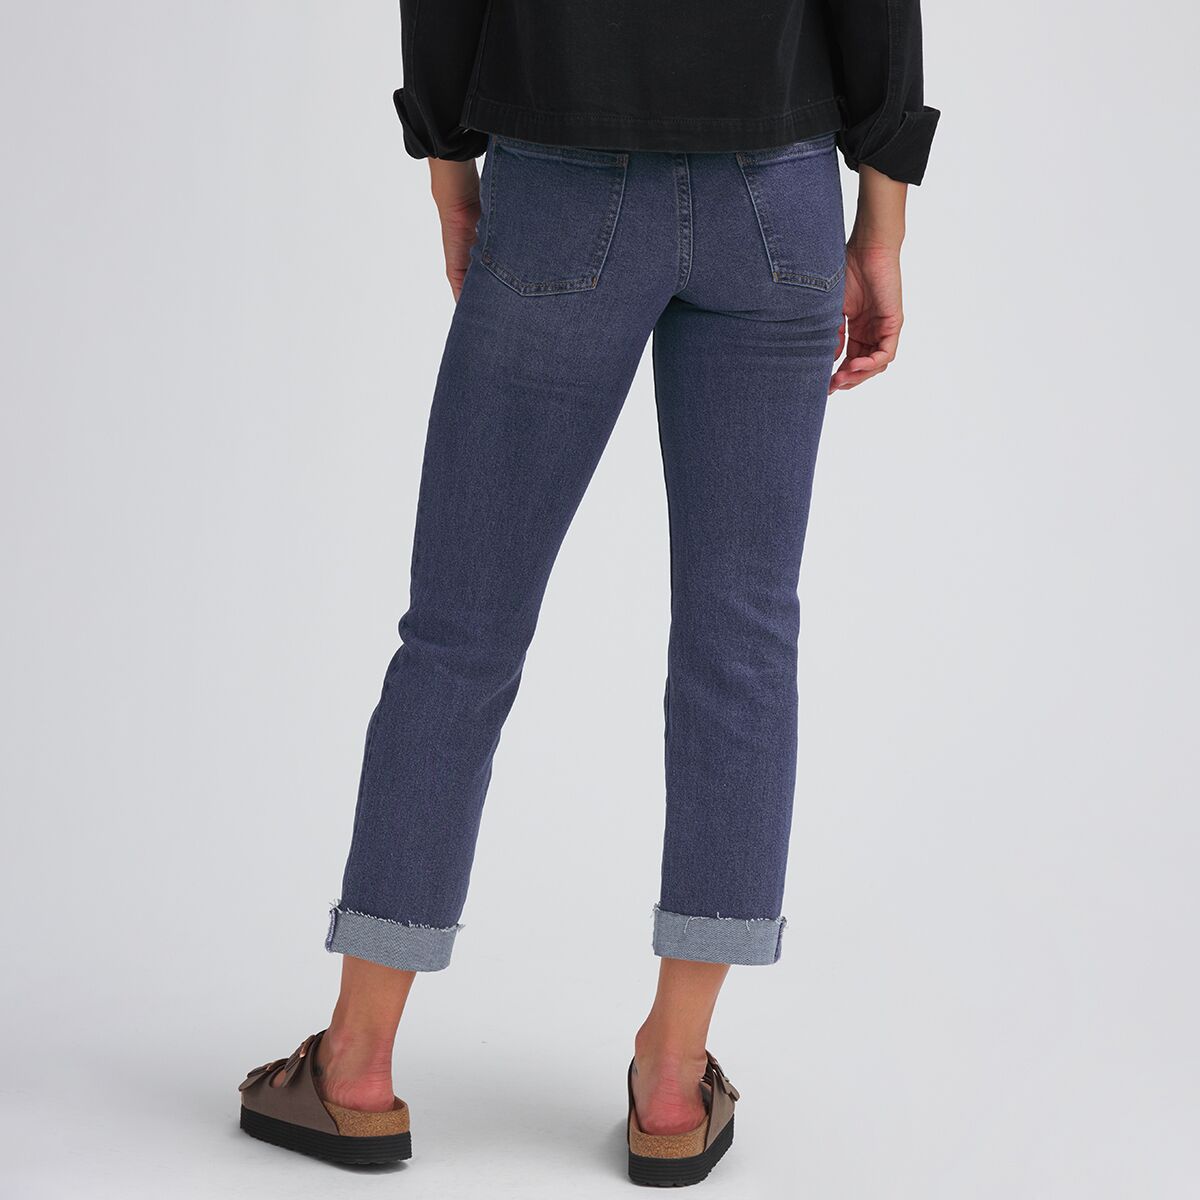 Basin and Range Stovepipe Jean Pant - Women's - Women